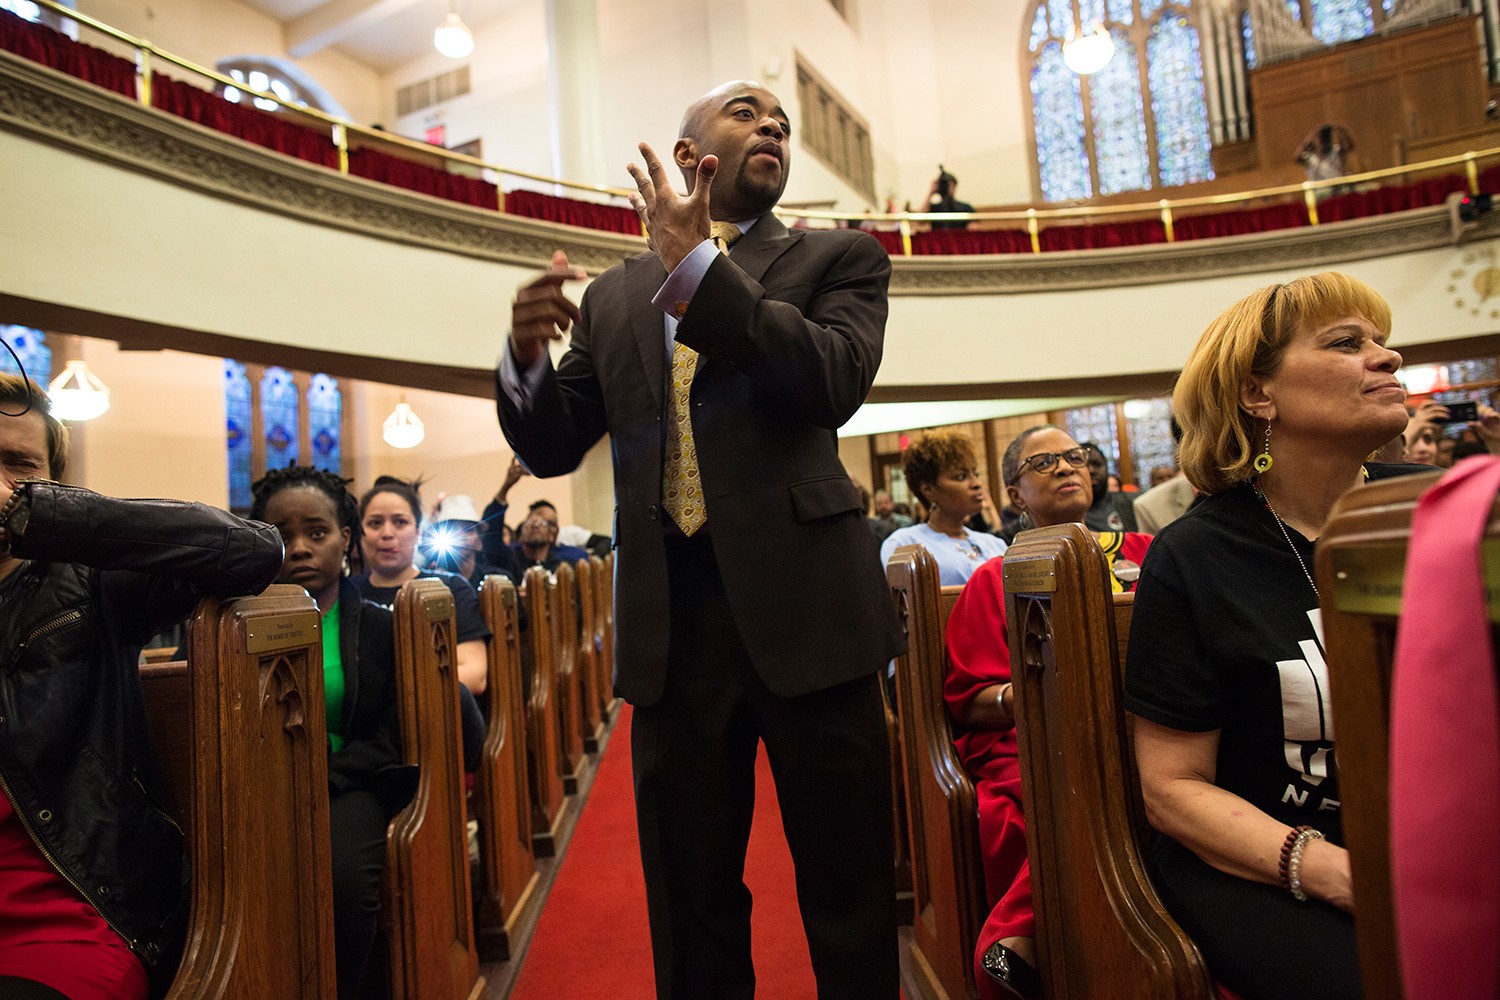  Choir master conducts during interfaith service at Harlem’s historic  Abyssinian Baptist Church  organized by advocacy group  VOCAL-NY  to call for end to the war on drugs on the eve of the United Nations General Assembly Special Session on the worl